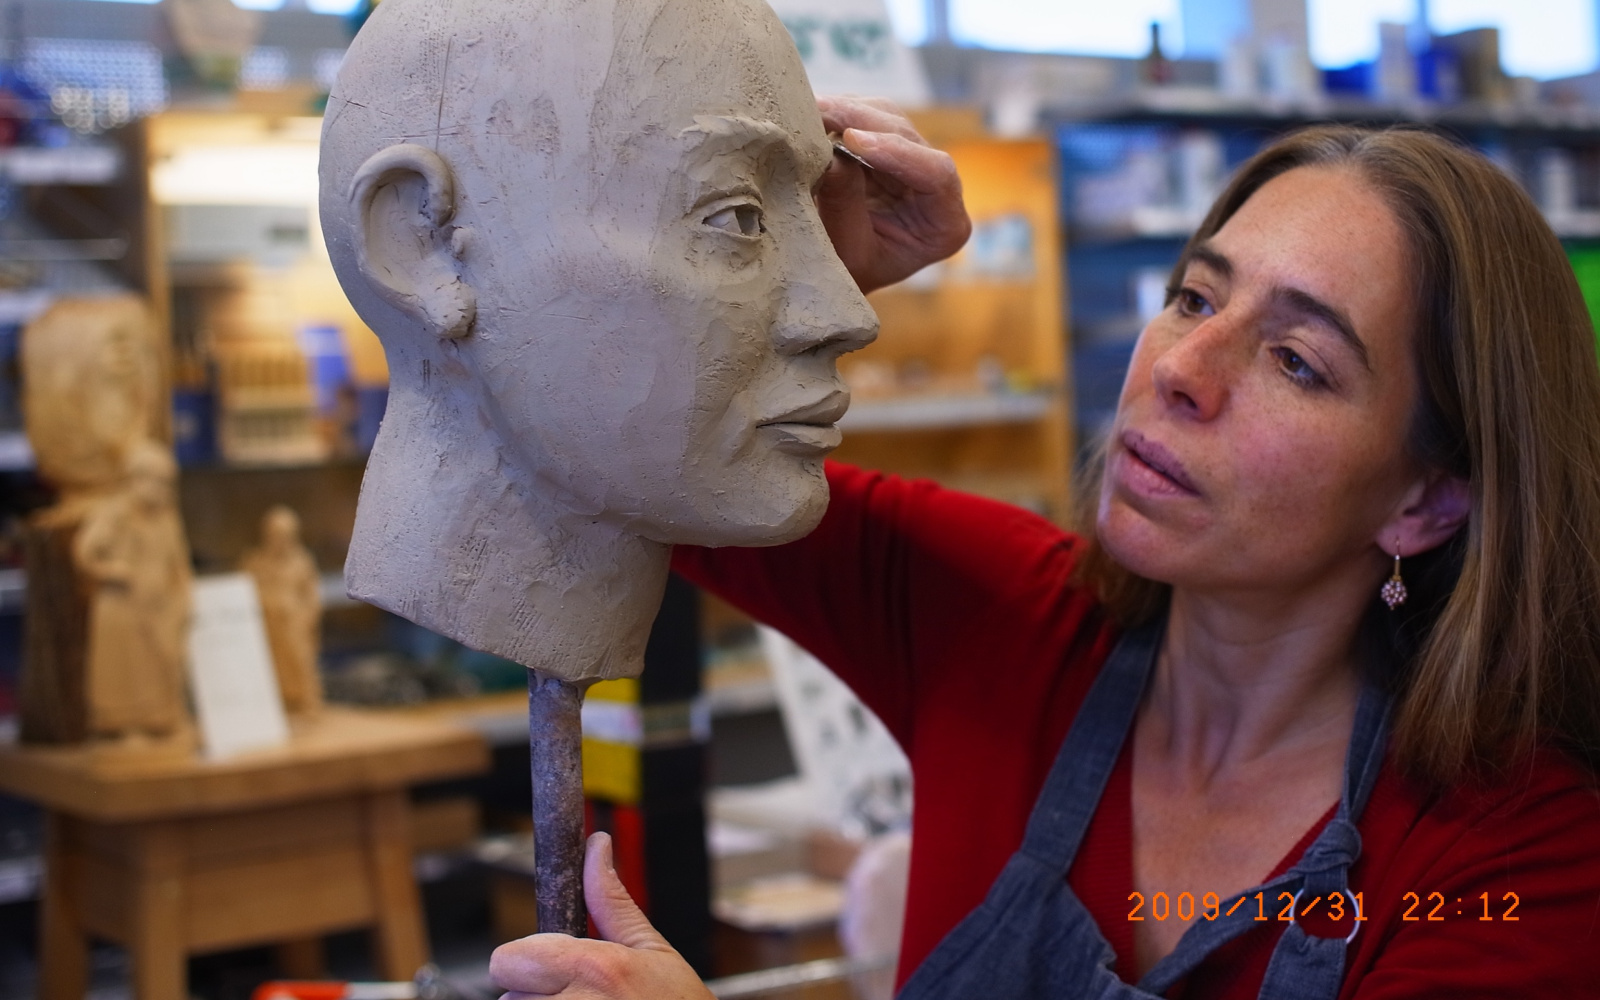 A model of a head sticking on a pole. A woman is working on it with a sculpting tool.